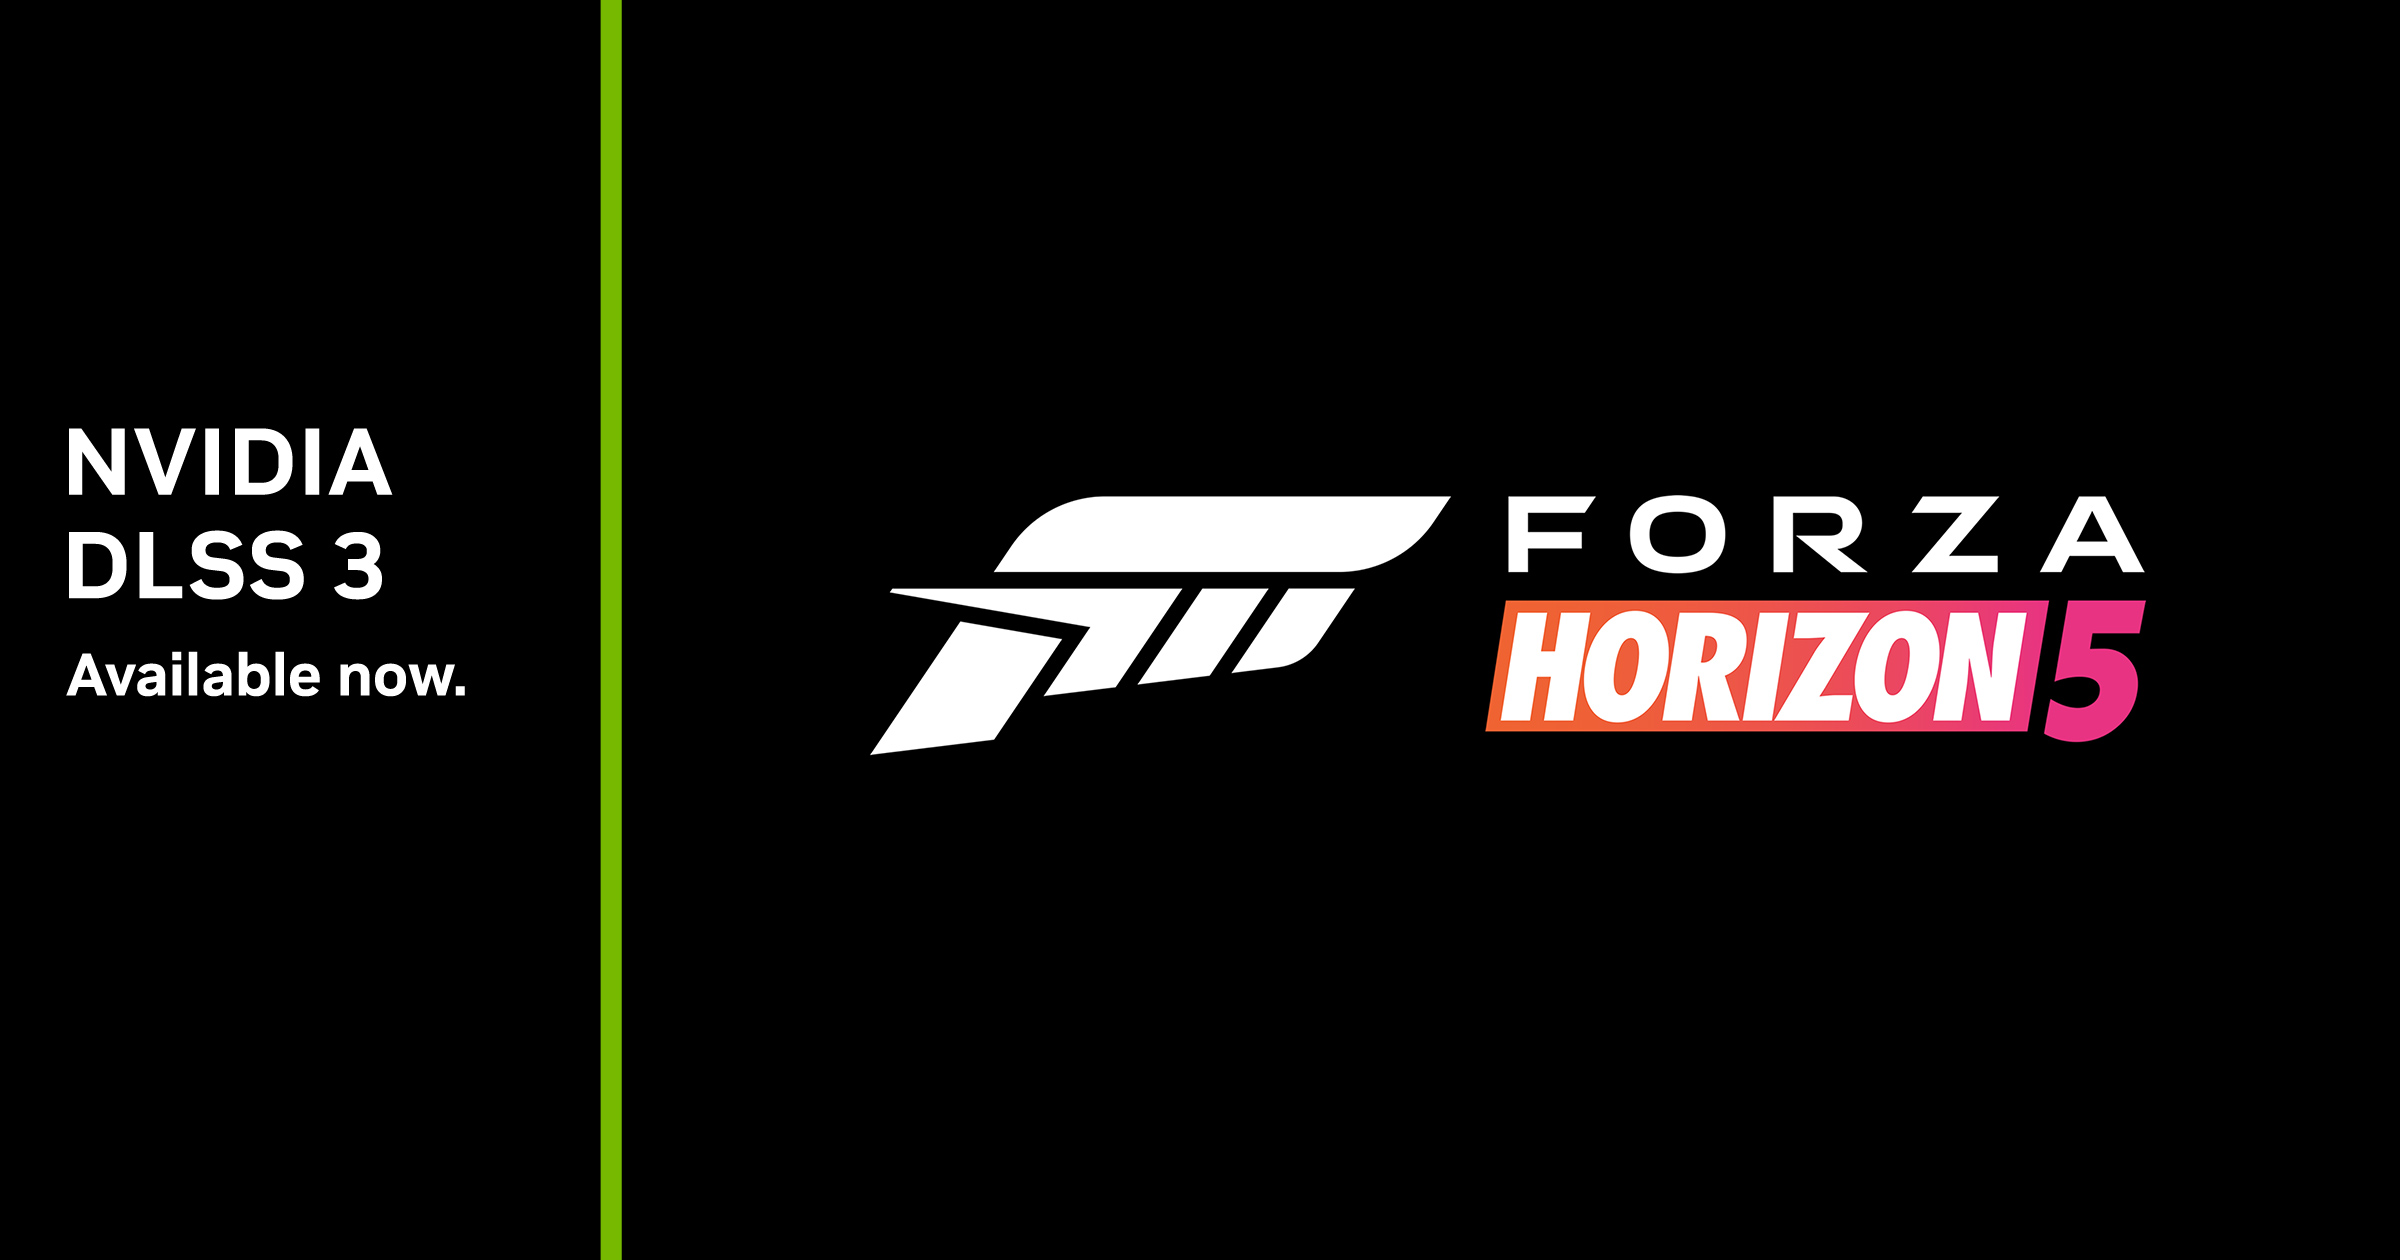 How i can download forza horizon 5 in my phone ?